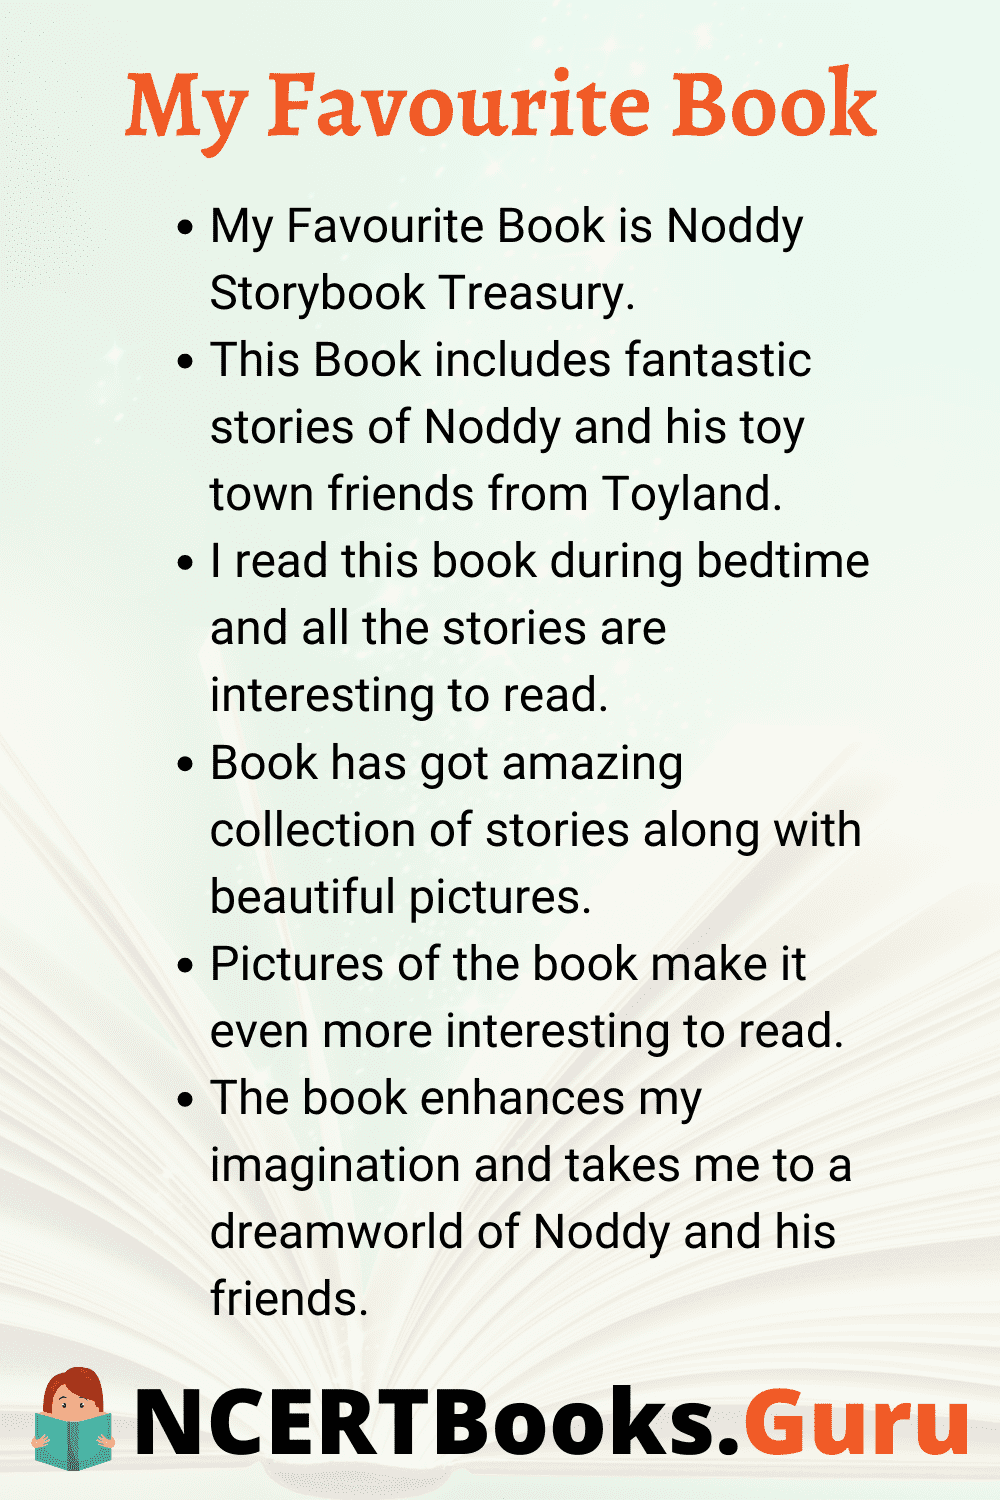 my favorite story book essay for class 1